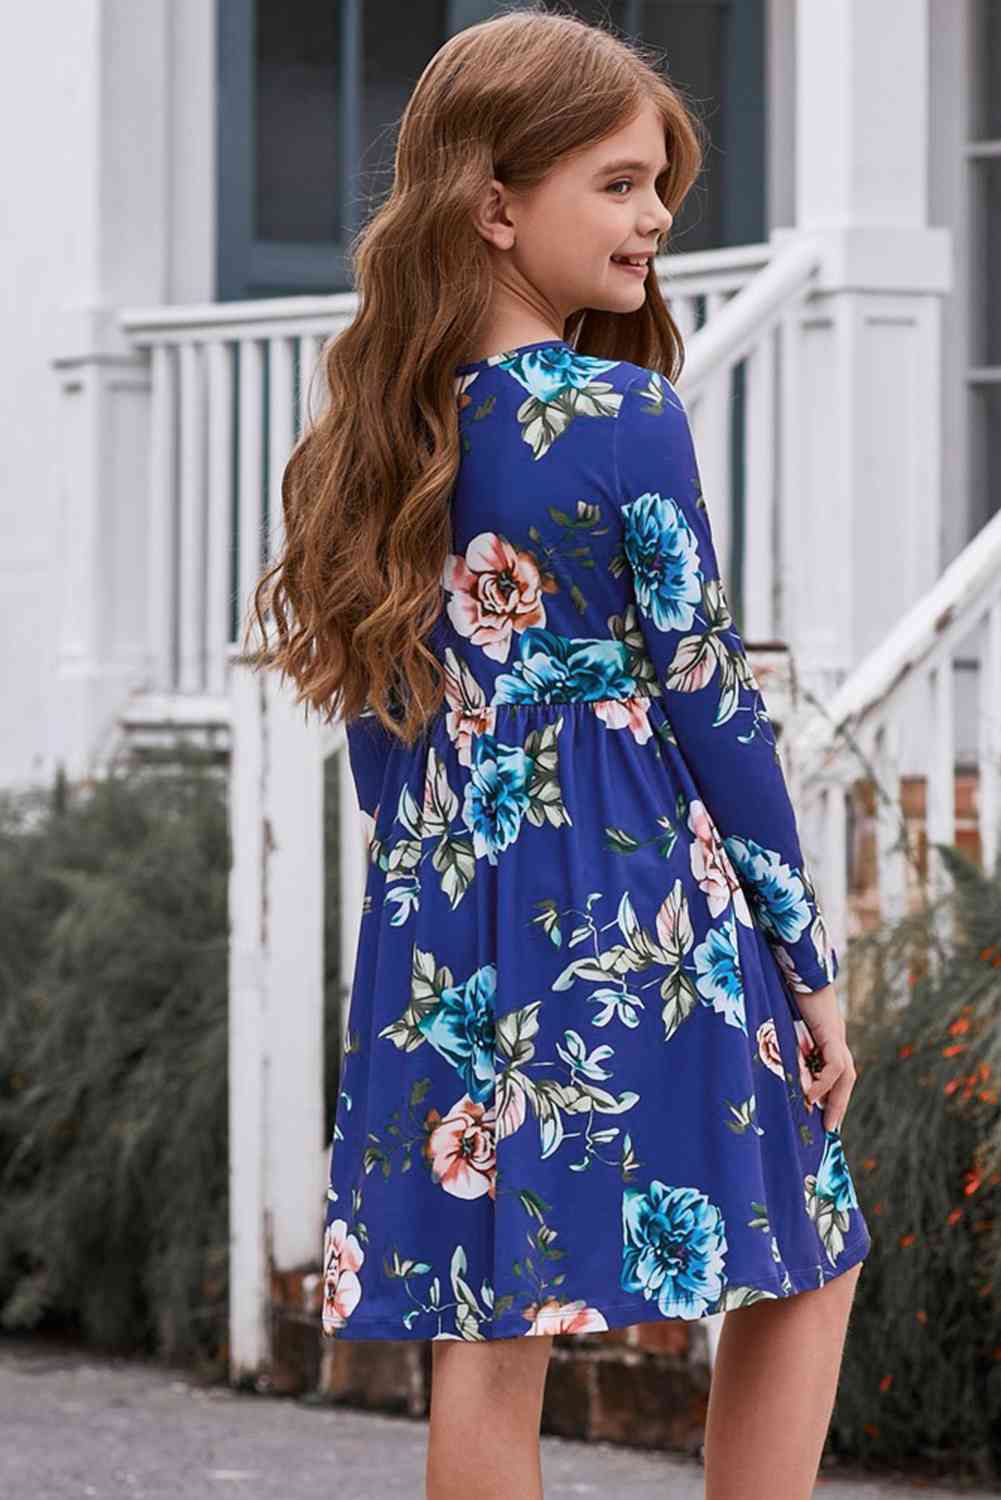 Girls Floral Long Sleeve Dress with Pockets - The Little Big Store